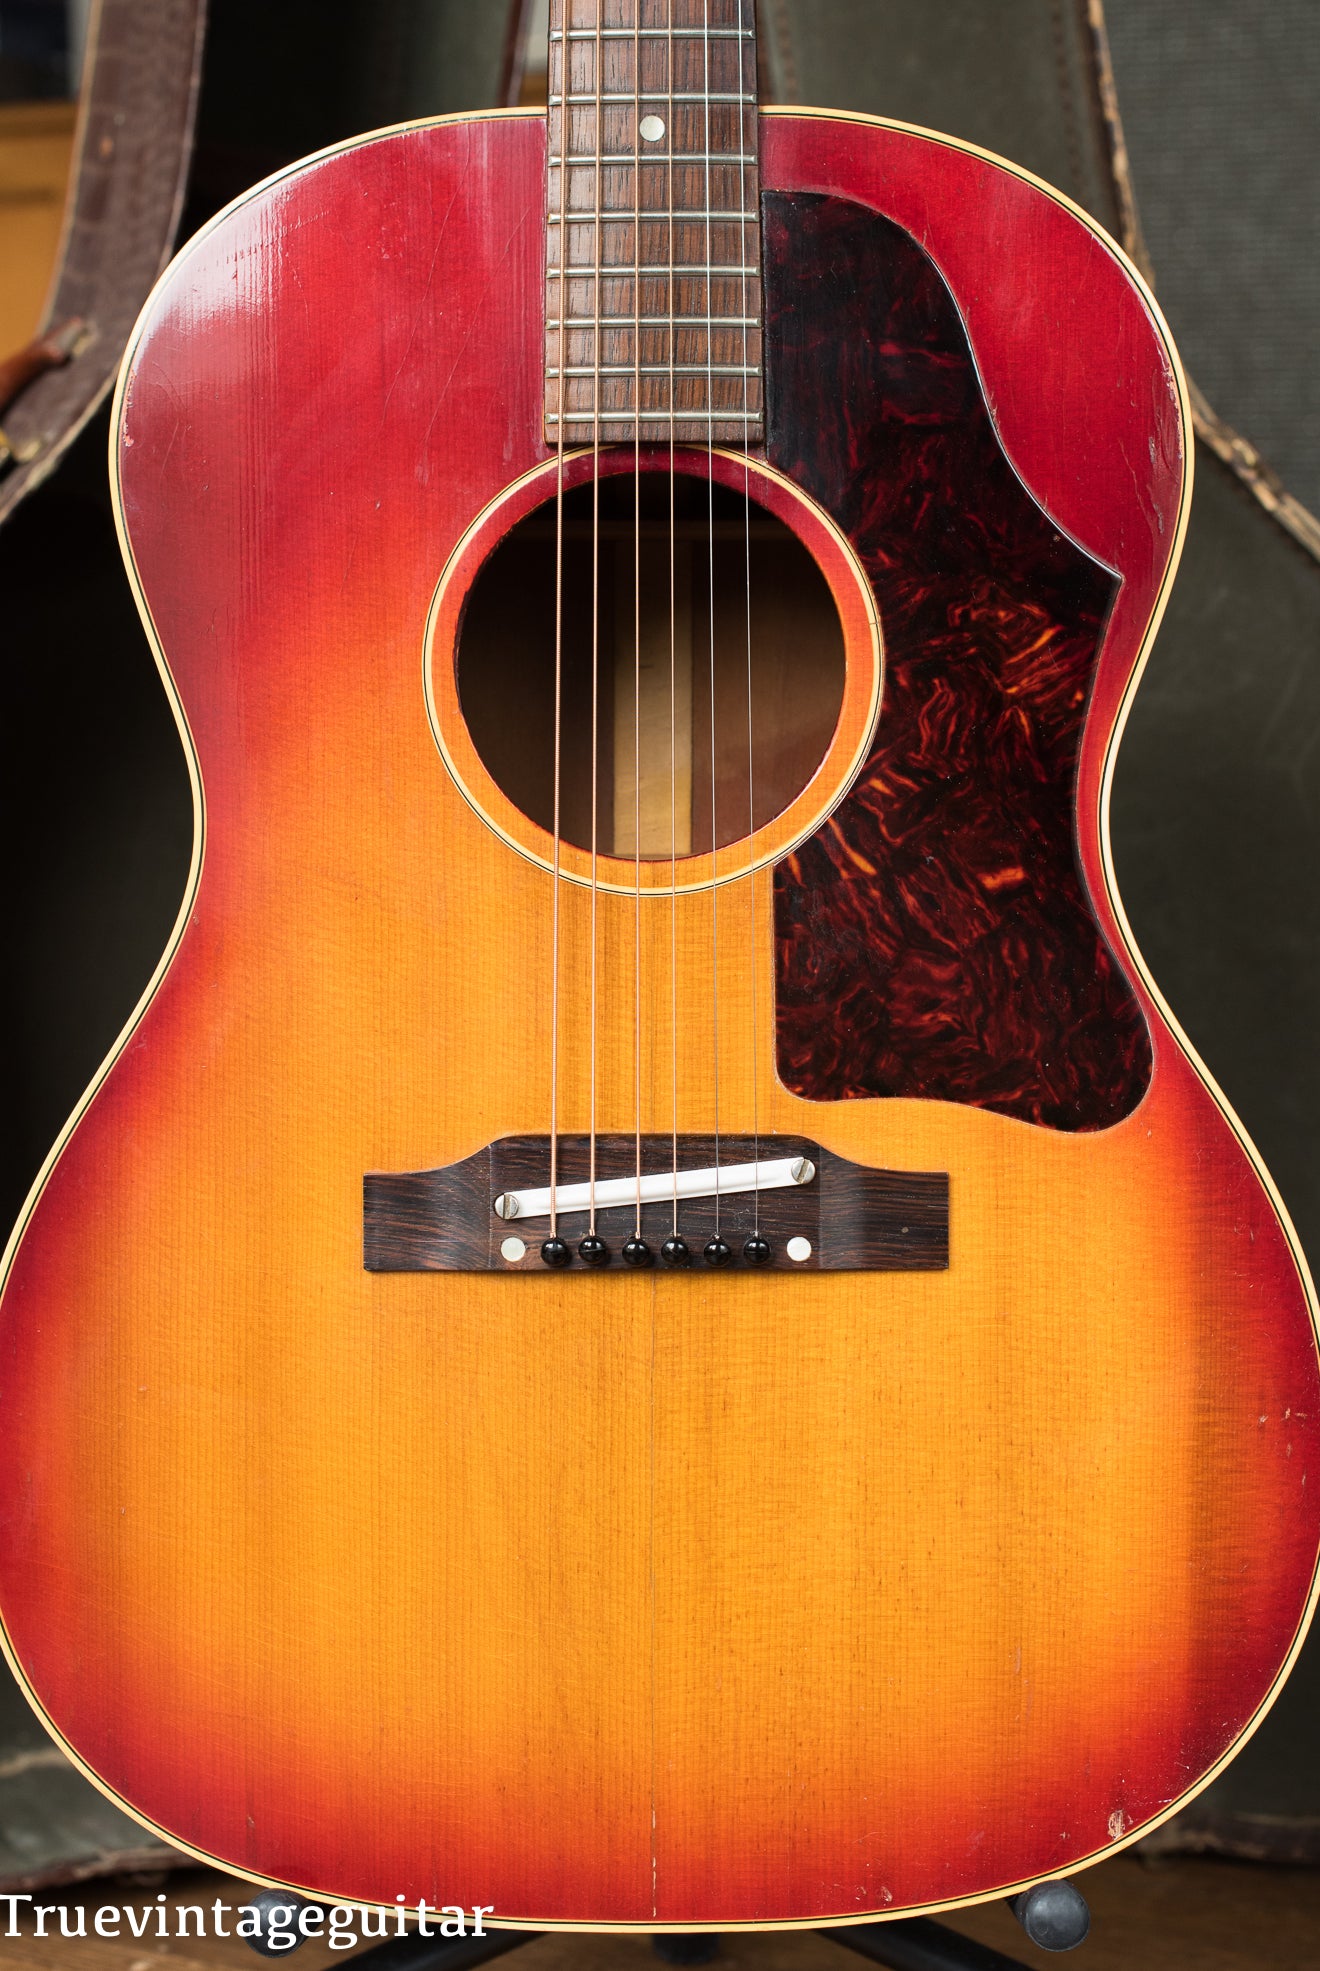 1962 Gibson LG-2 acoustic guitar